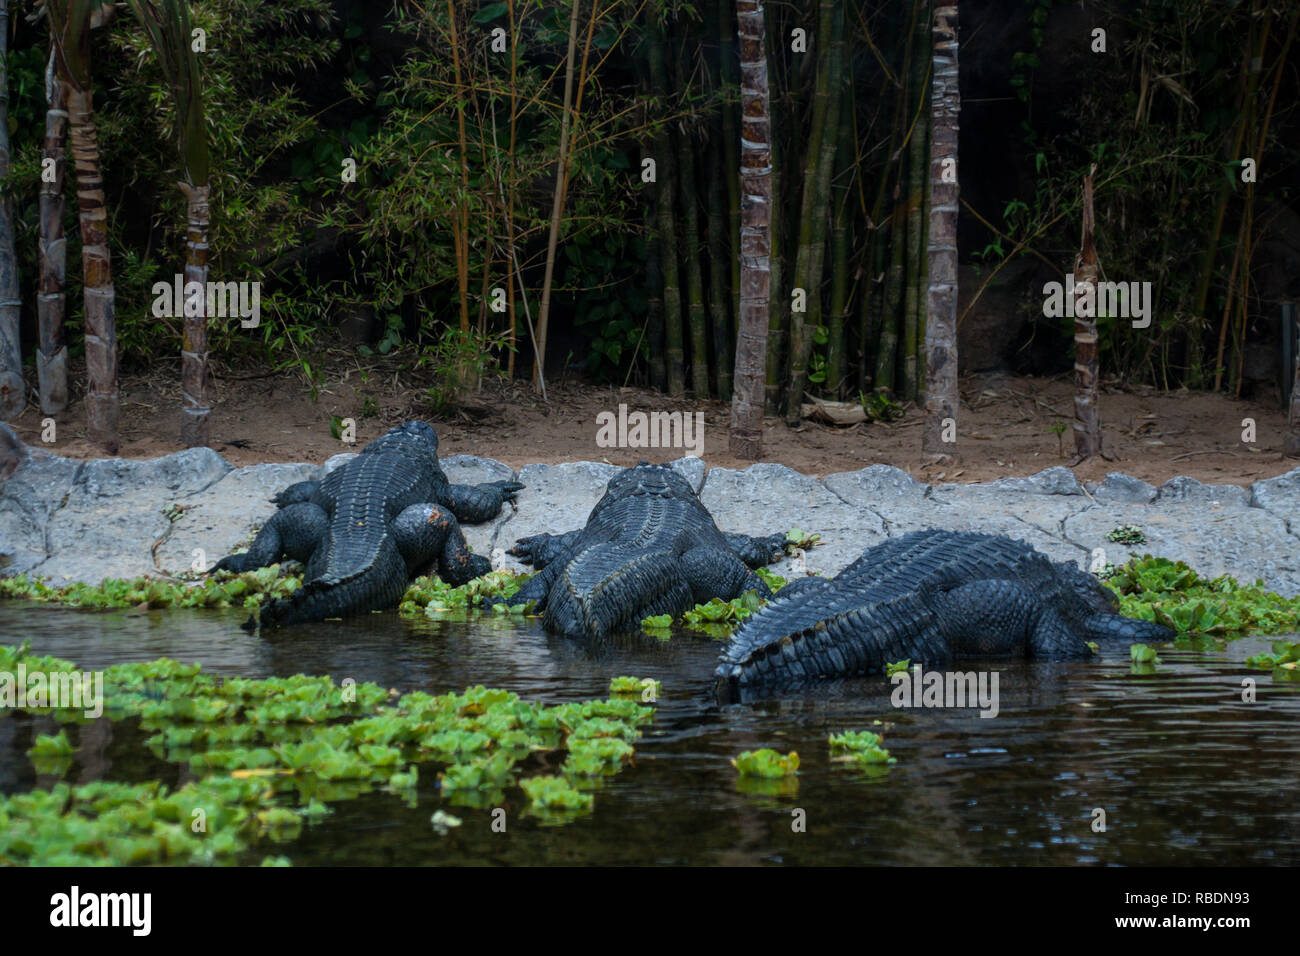 A nice photograph of three alligators relaxing at a river Stock Photo